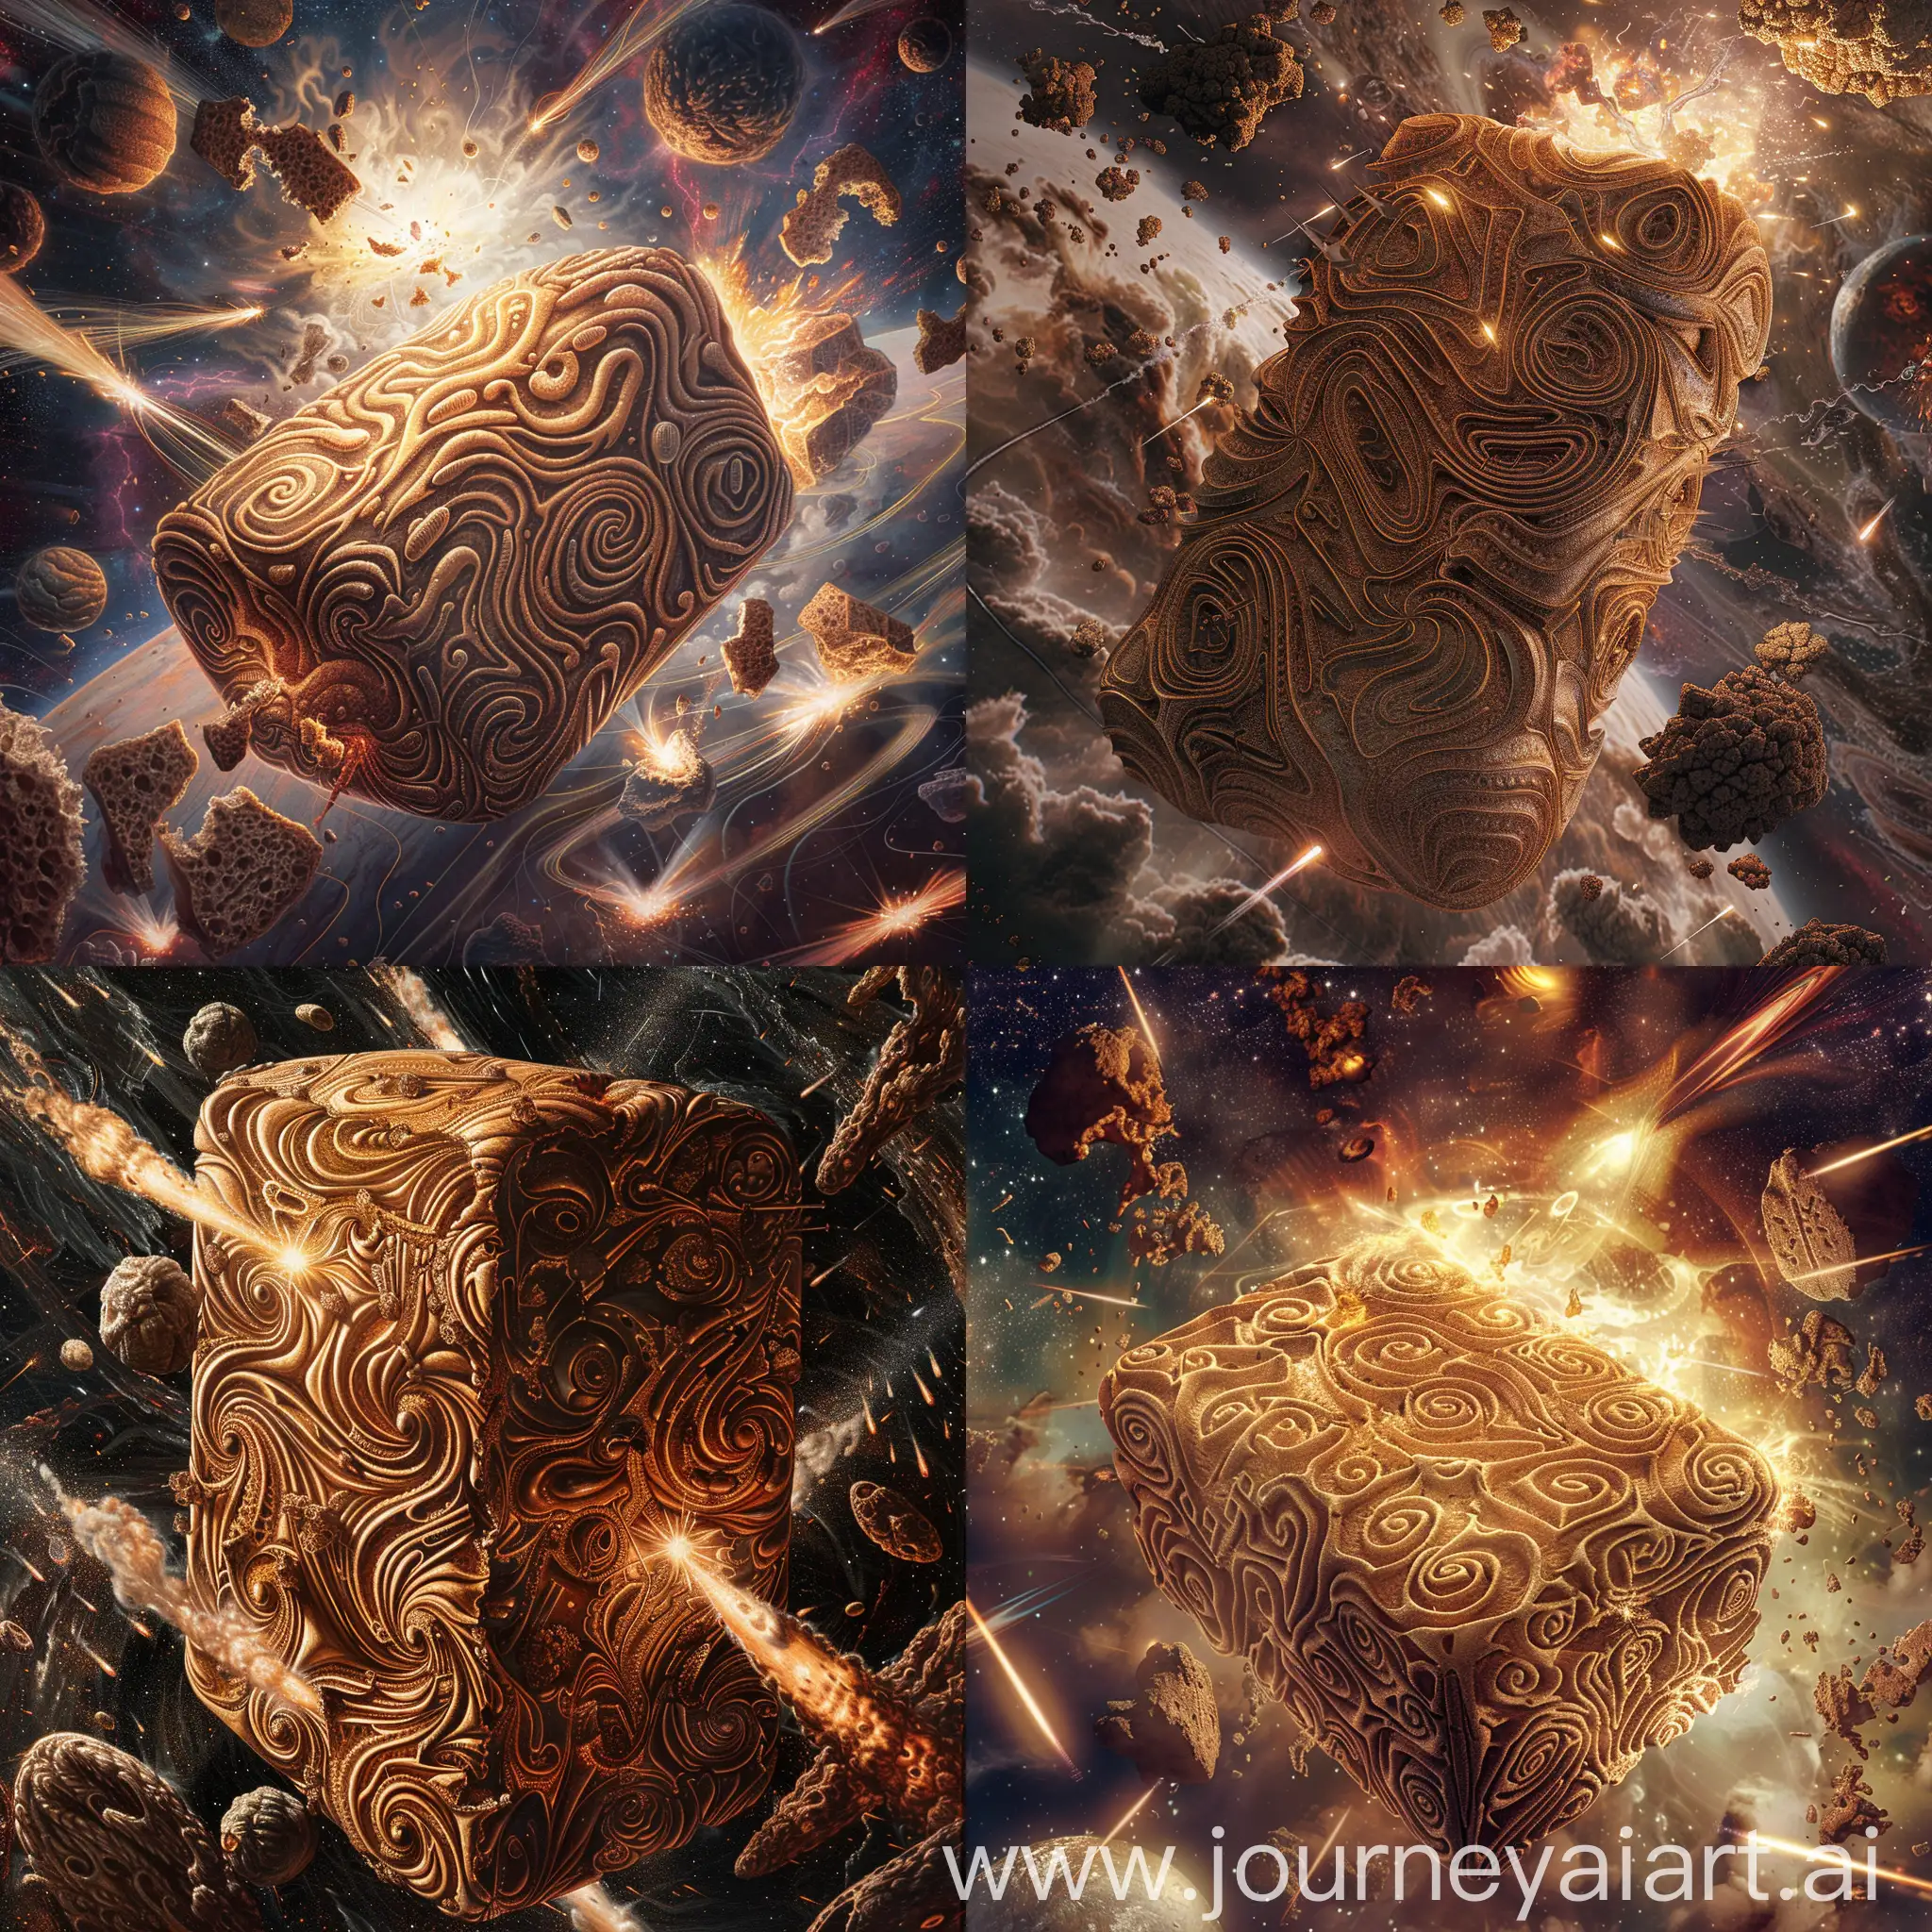 Epic-Cosmic-Battle-Majestic-Loaf-of-Bread-Amidst-Swirling-Chaos